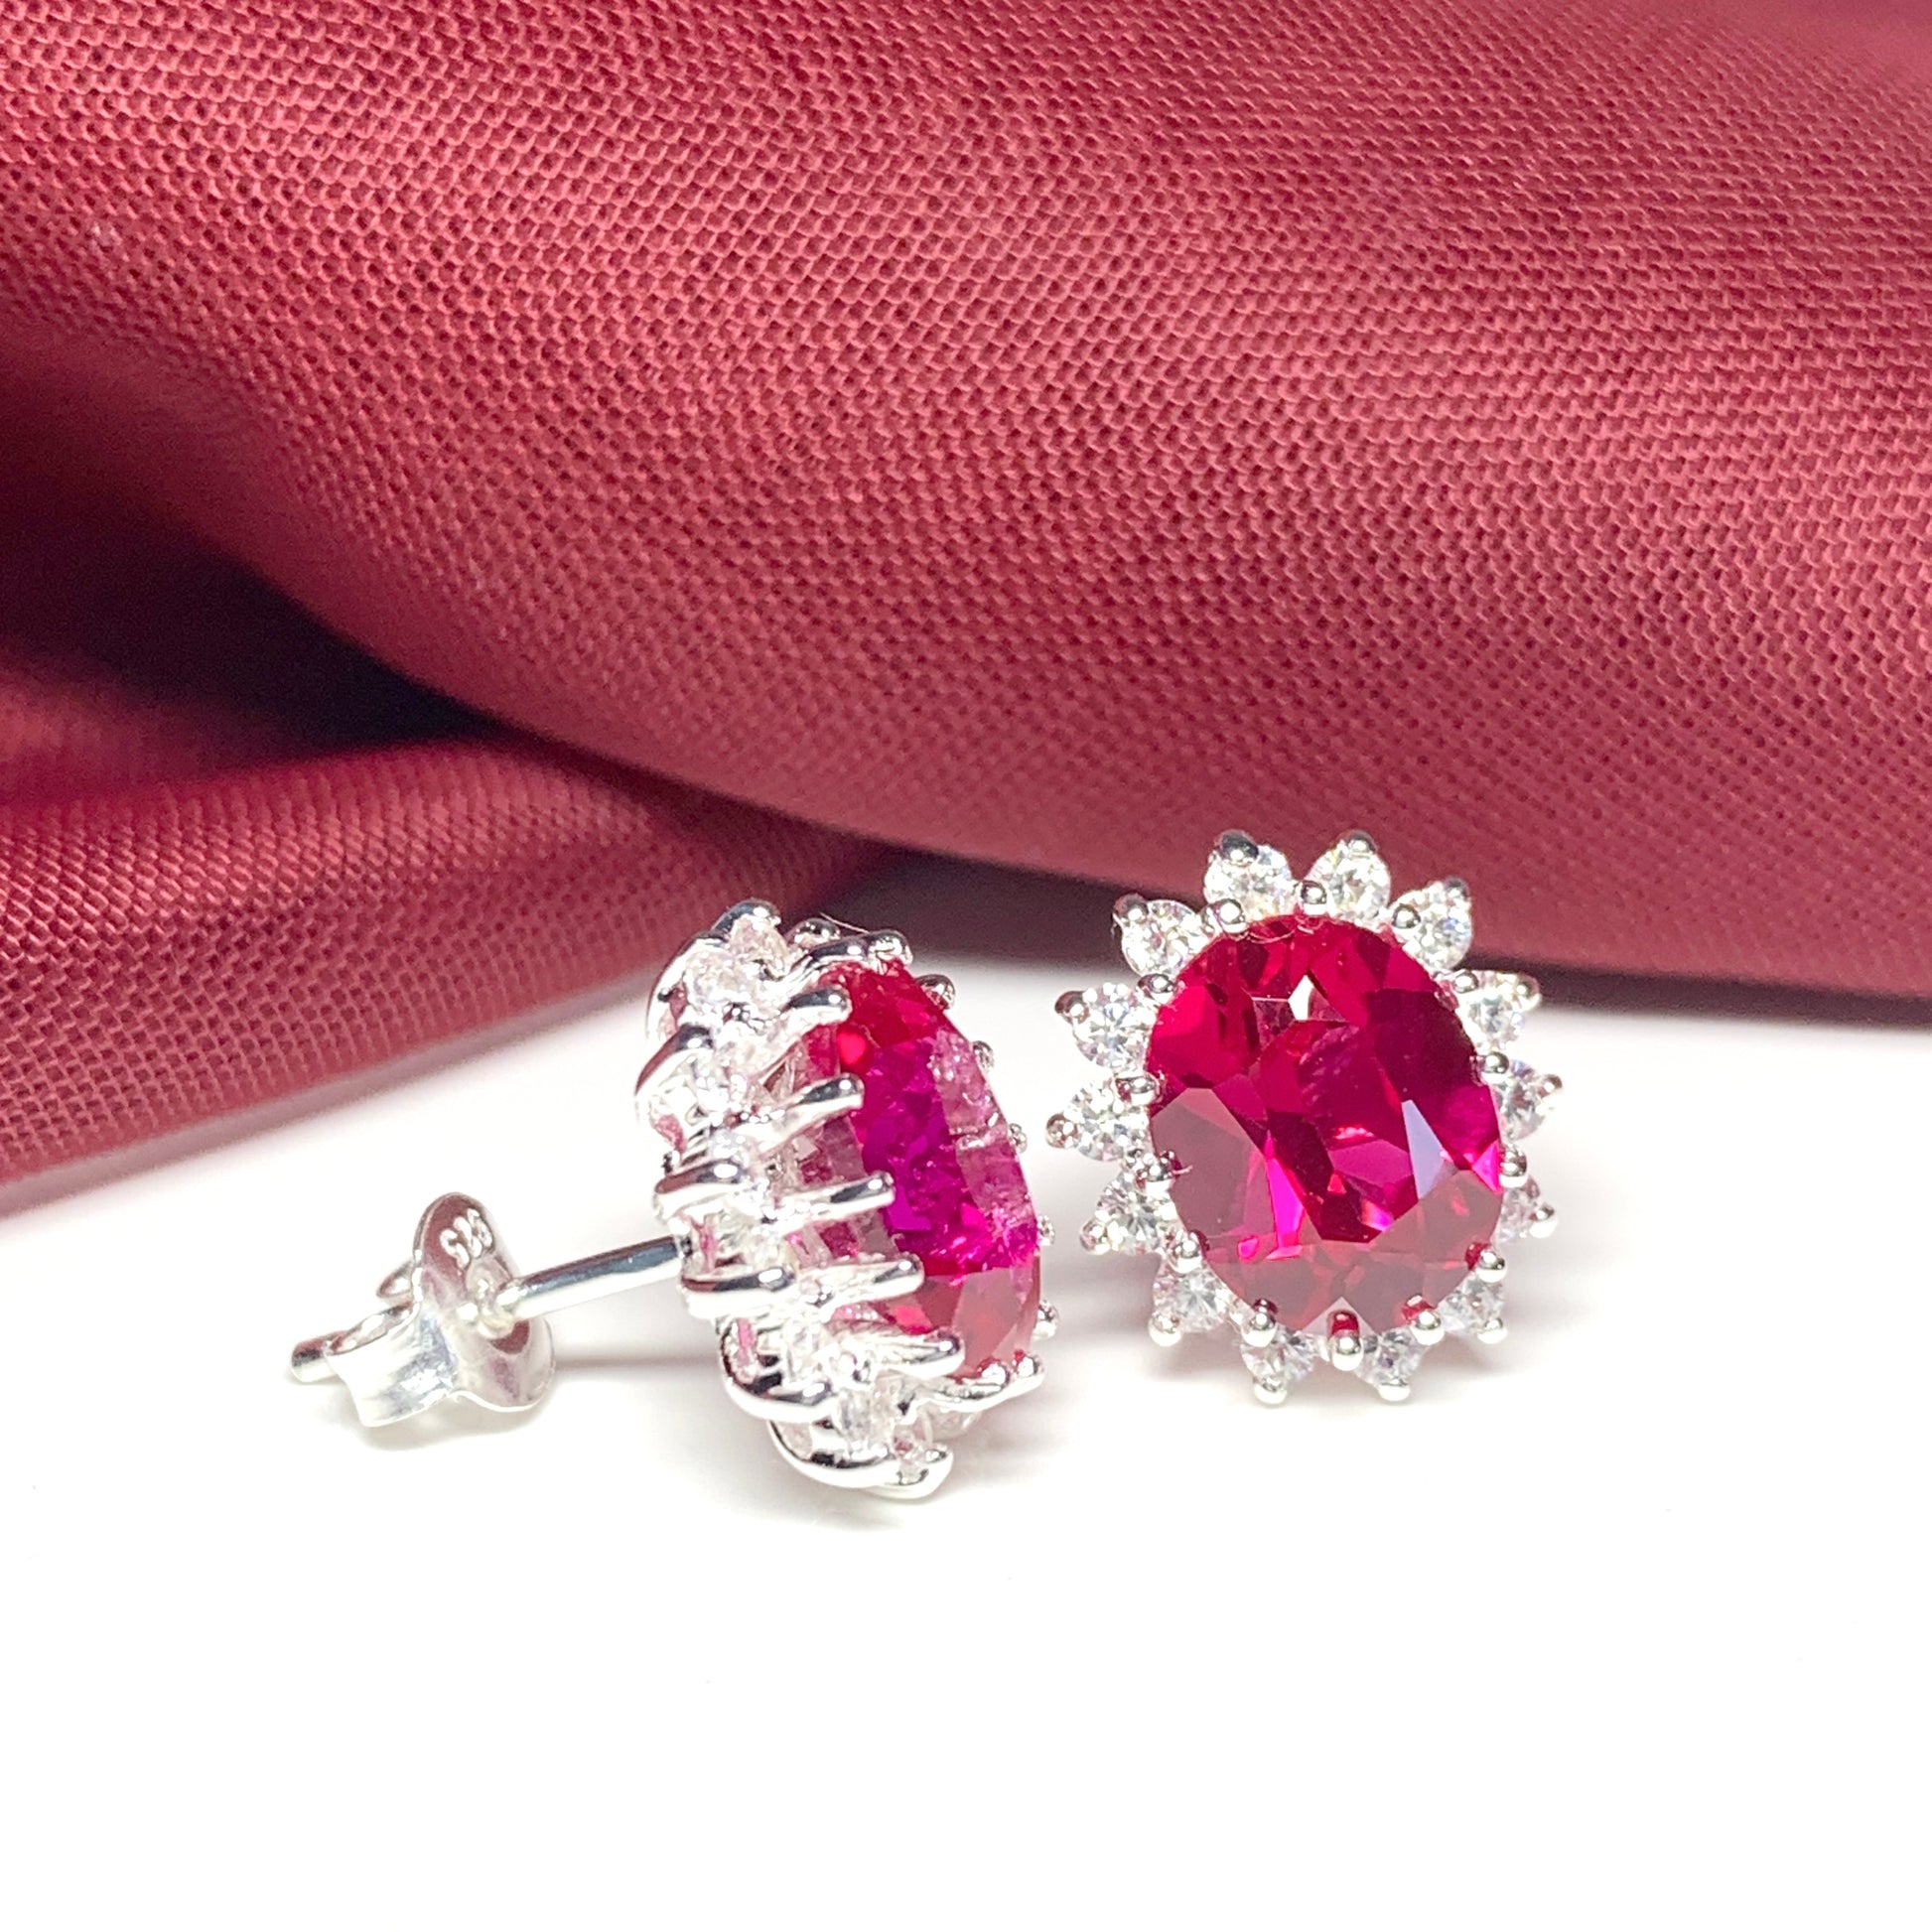 Large bright ruby red and white cubic zirconia oval cluster dress cocktail stud earrings